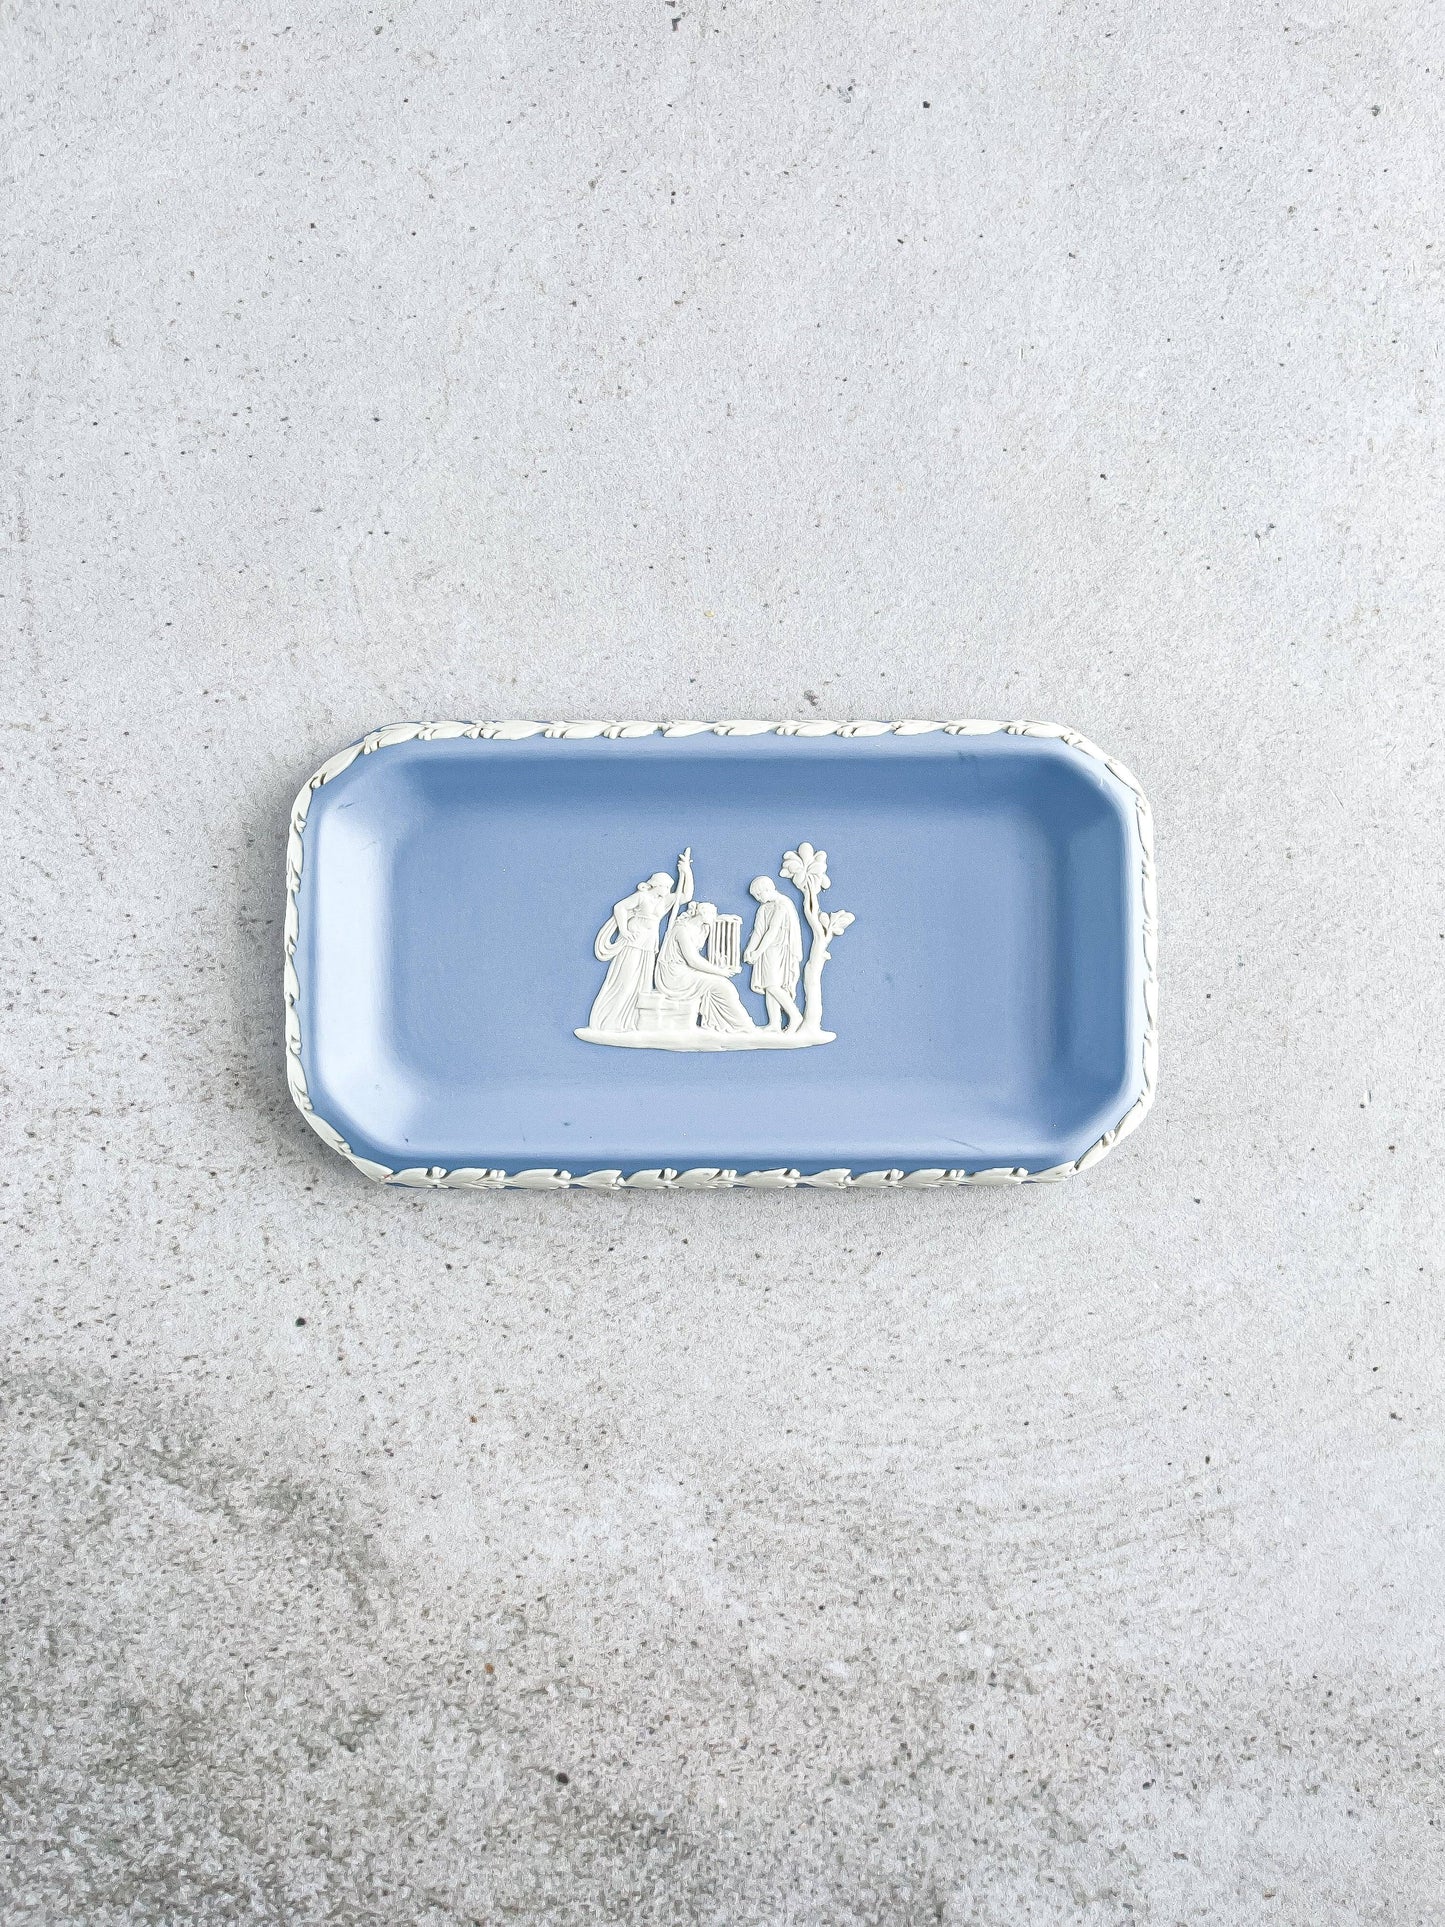 Wedgwood Jasperware Pale Blue Oblong Tray - 'Group with Cage' Design - SOSC Home